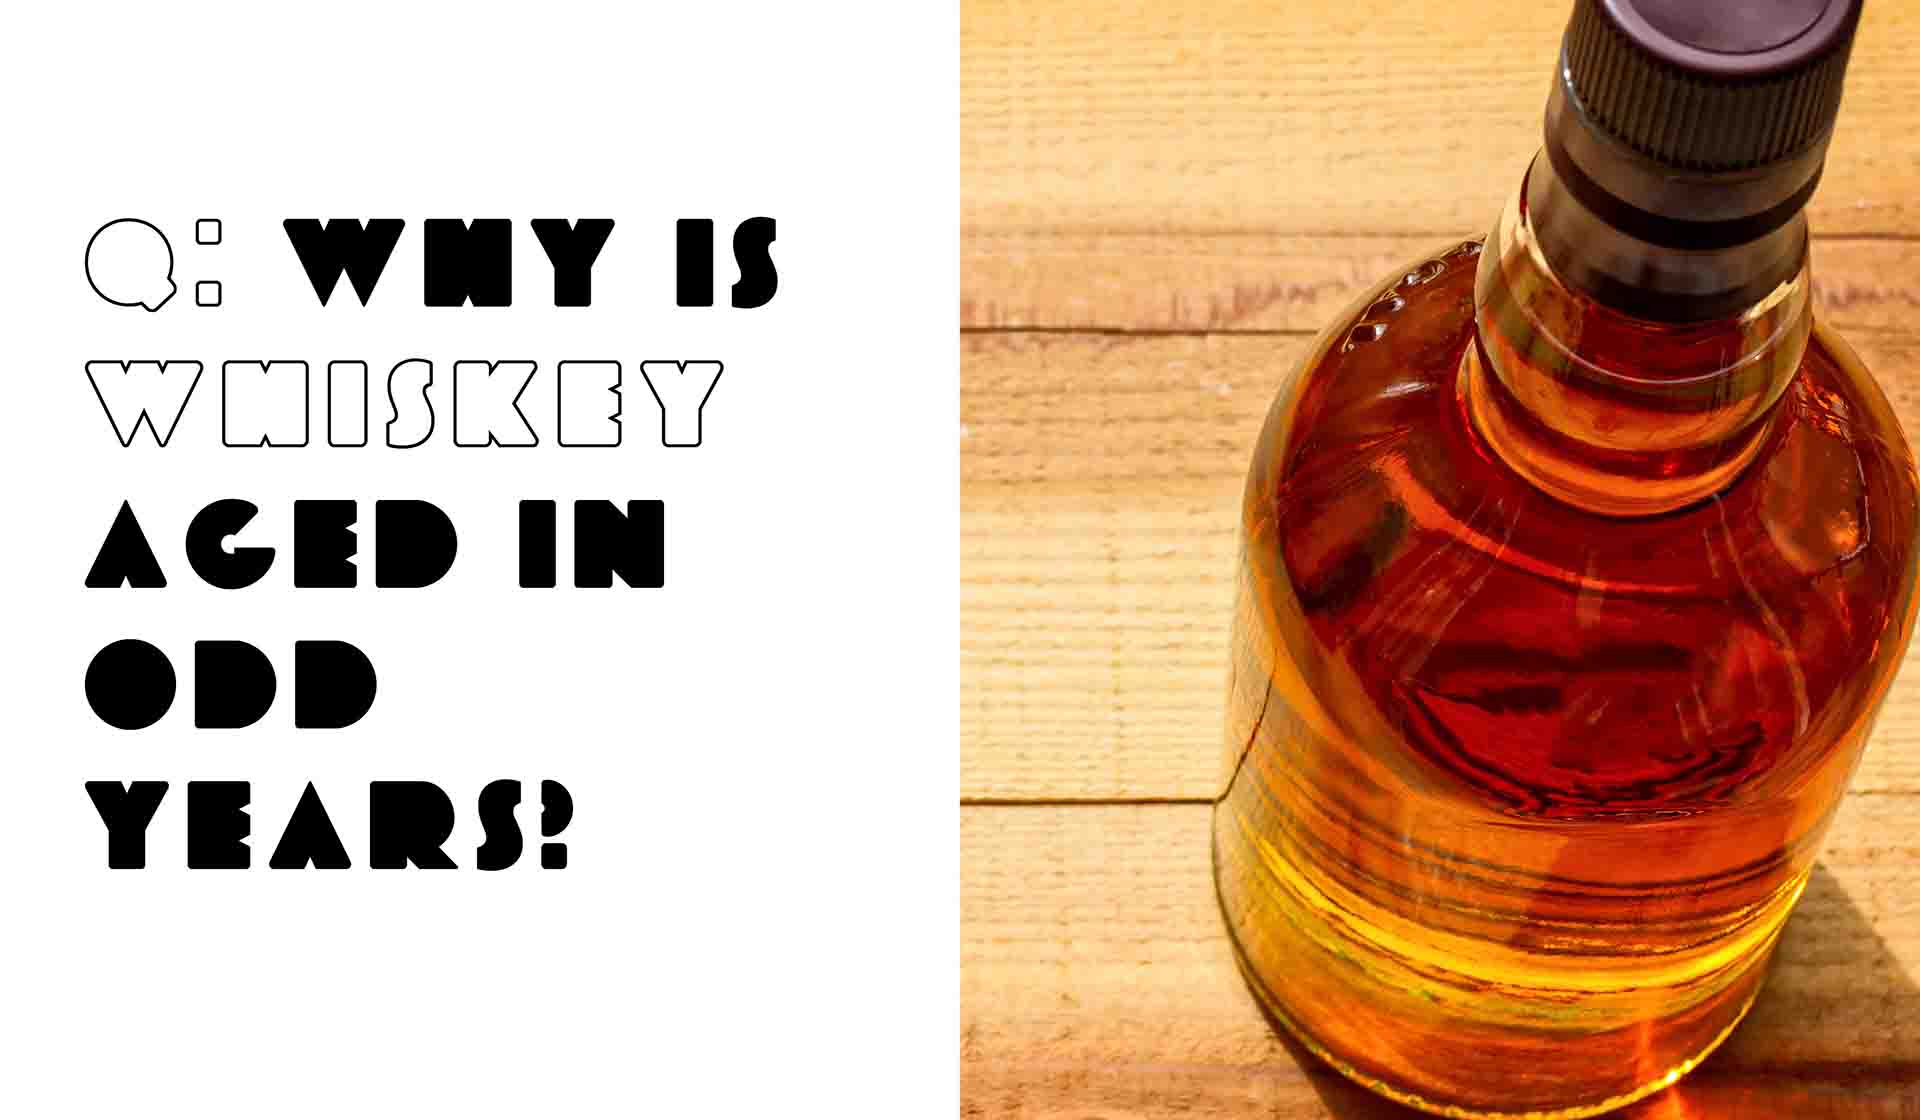 Why Is Whiskey Normally Aged in Odd Years?